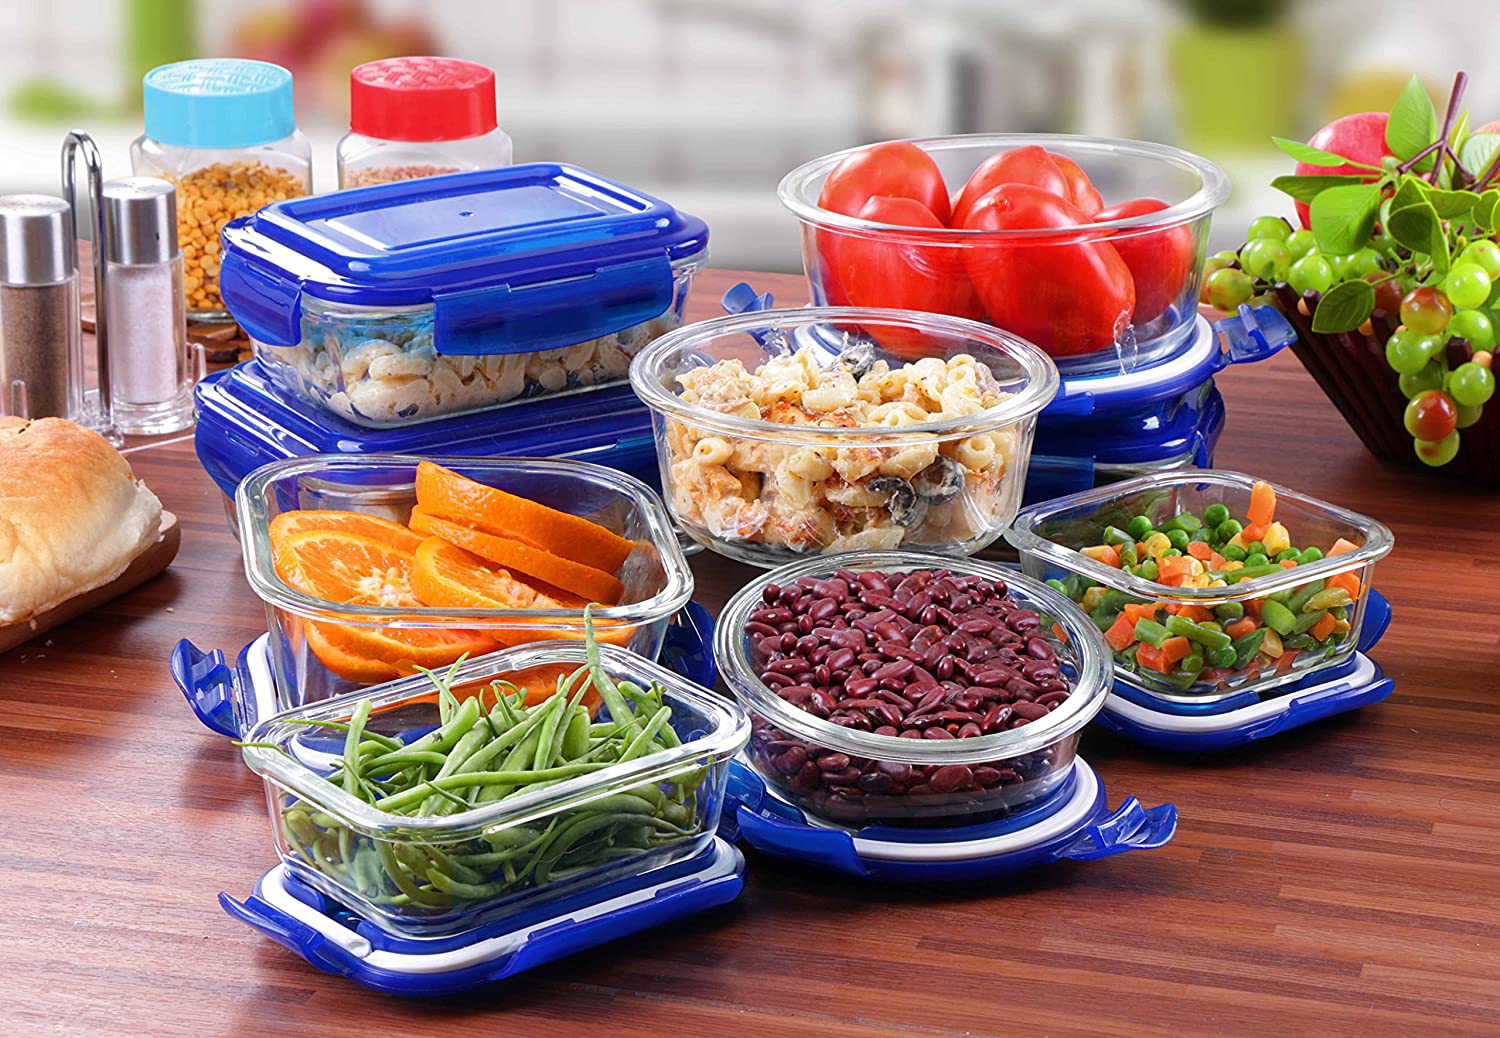 Utopia Kitchen Glass Food Storage Container Set - 18 Pieces (9 Containers  and 9 Lids) - Transparent Lids - BPA Free